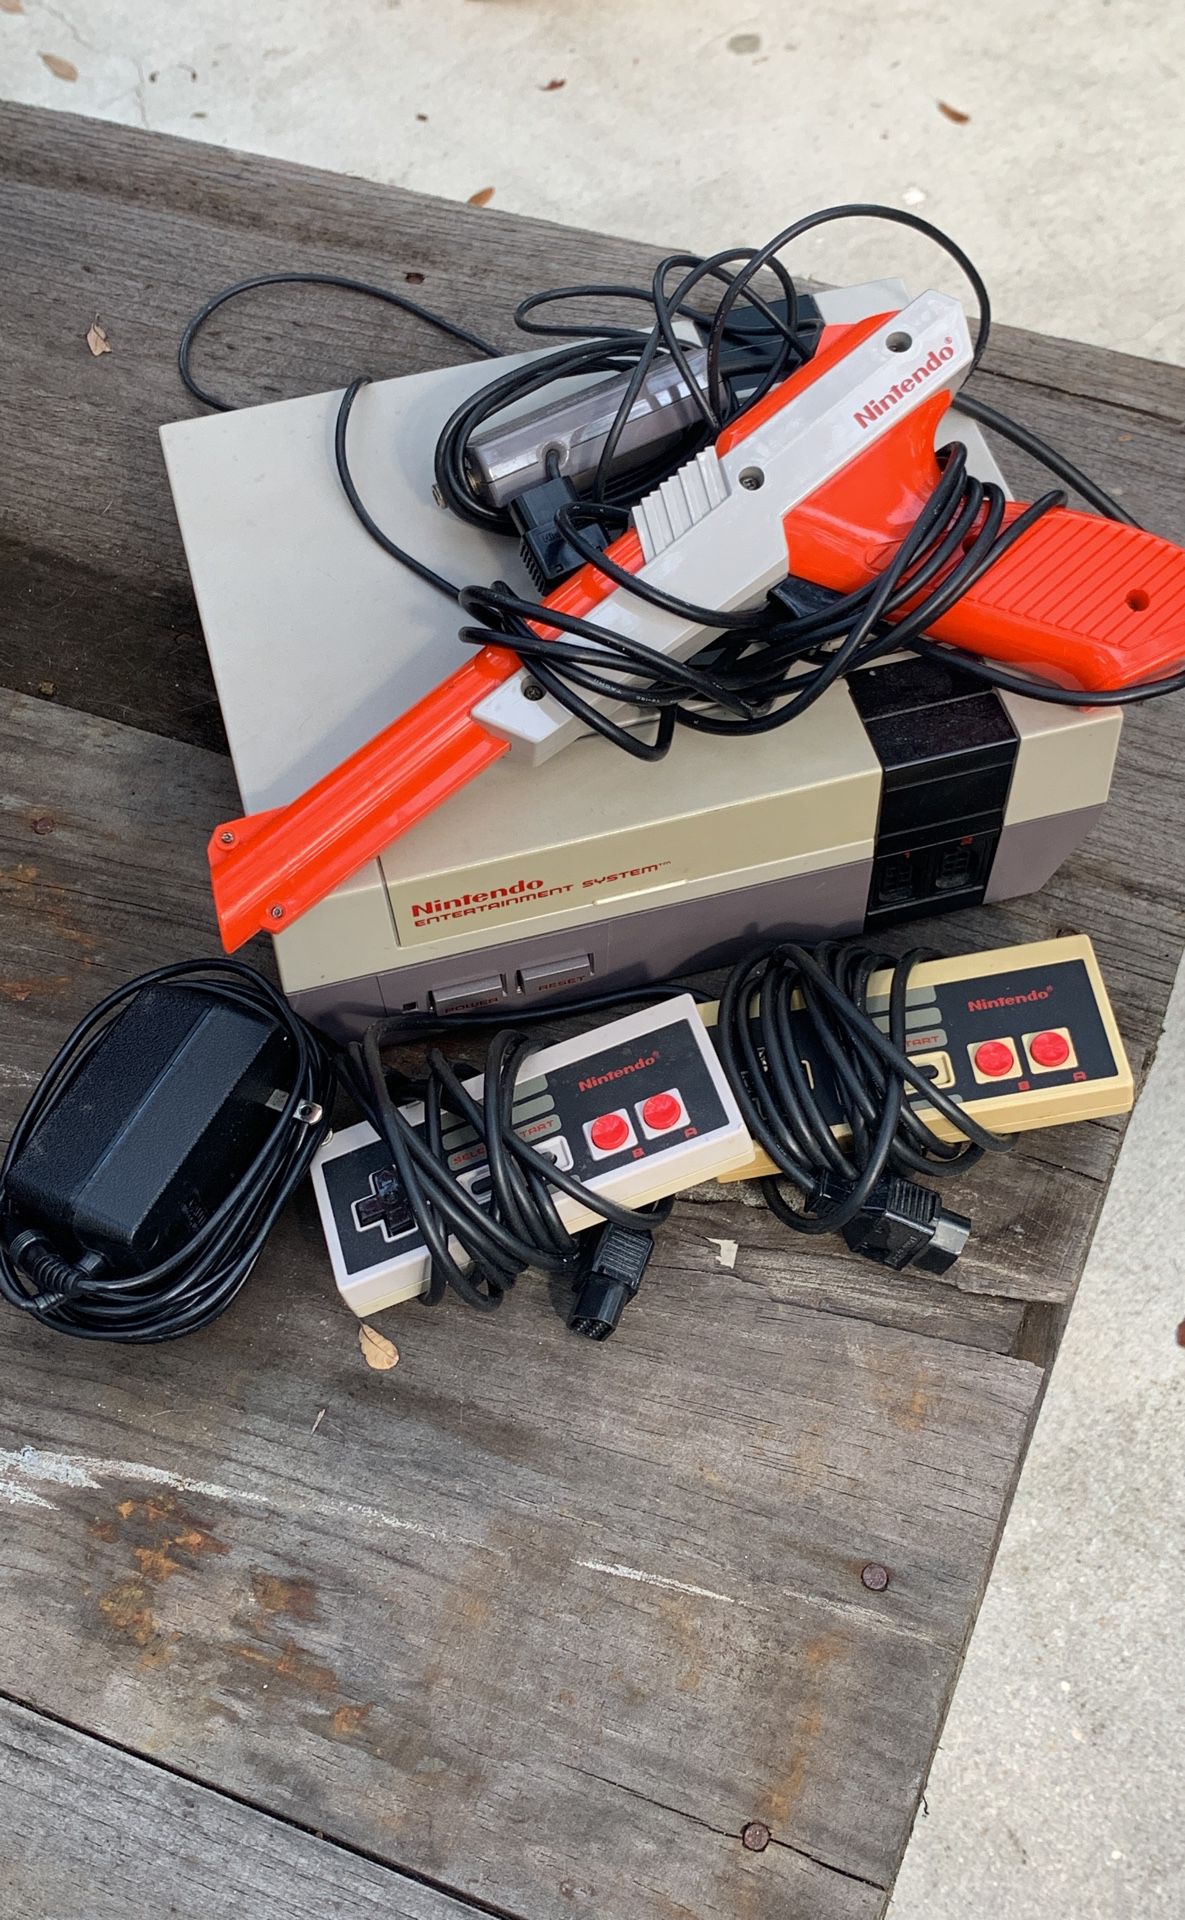 Original Nintendo system with 2 controllers, gun, and 5 games